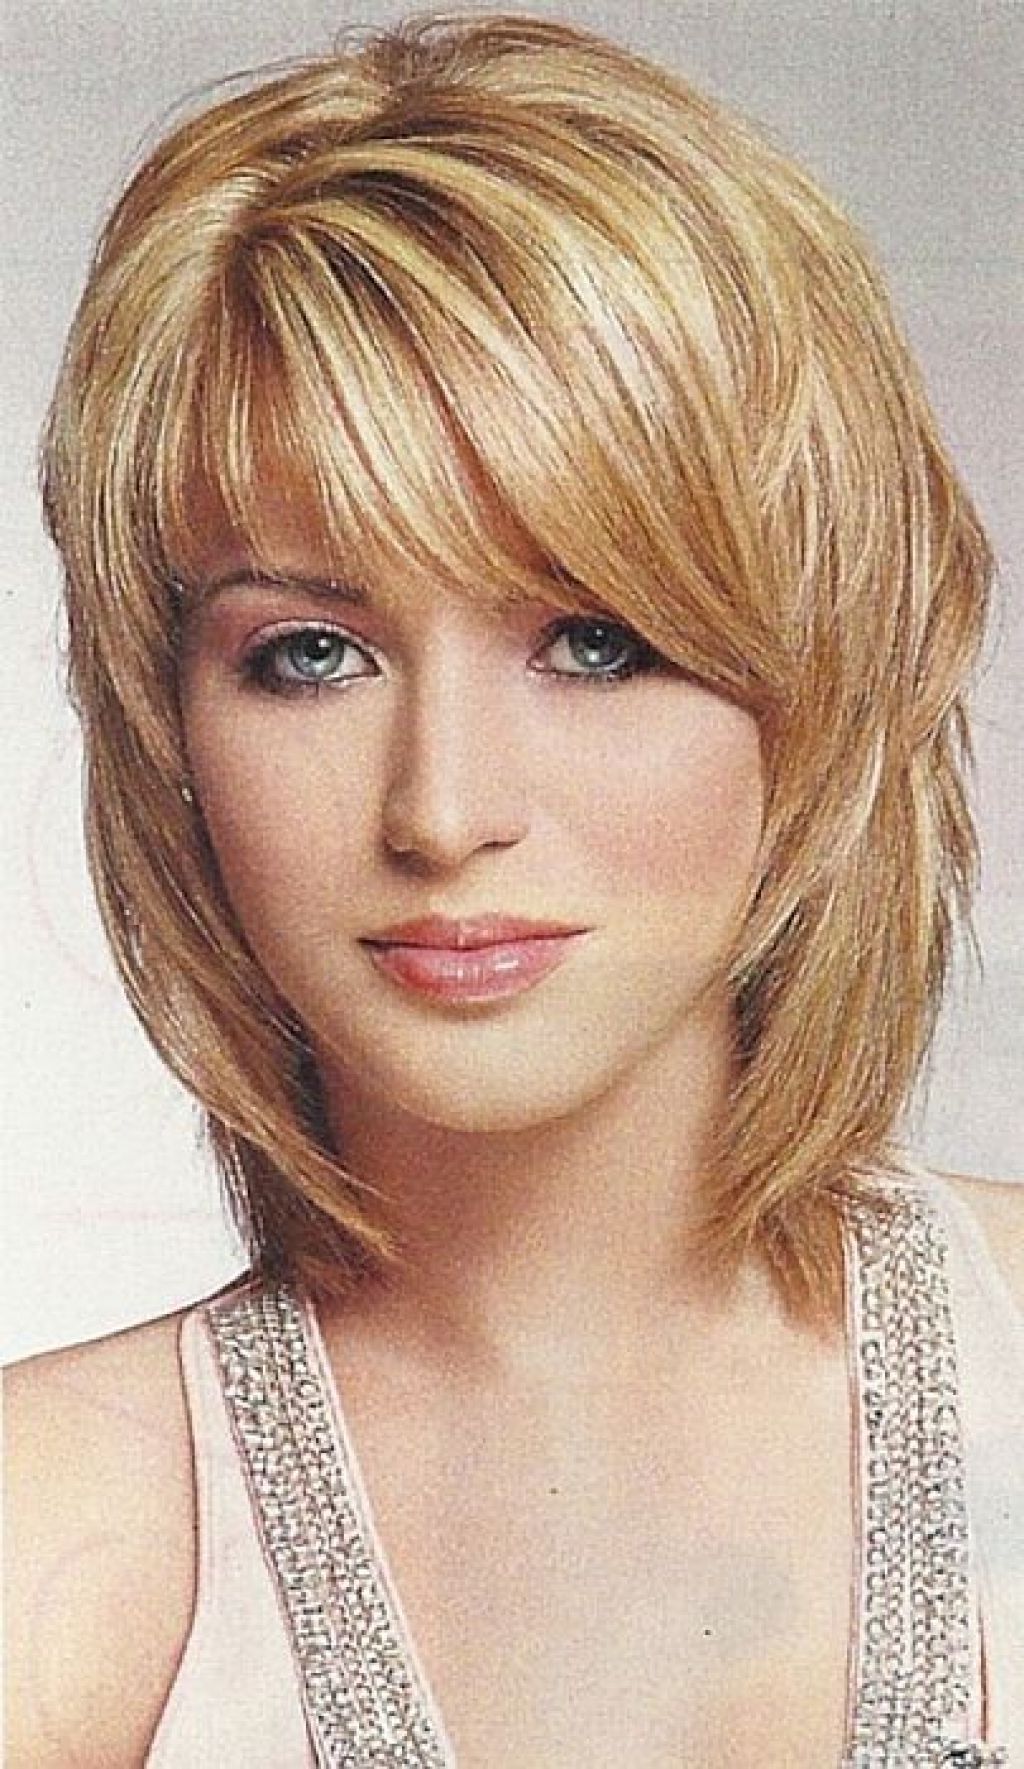 Shaggy Bob Hairstyles For Fine Hair 26 With Shaggy Bob Hairstyles For Newest Shaggy Bob Hairstyles For Fine Hair (View 10 of 15)